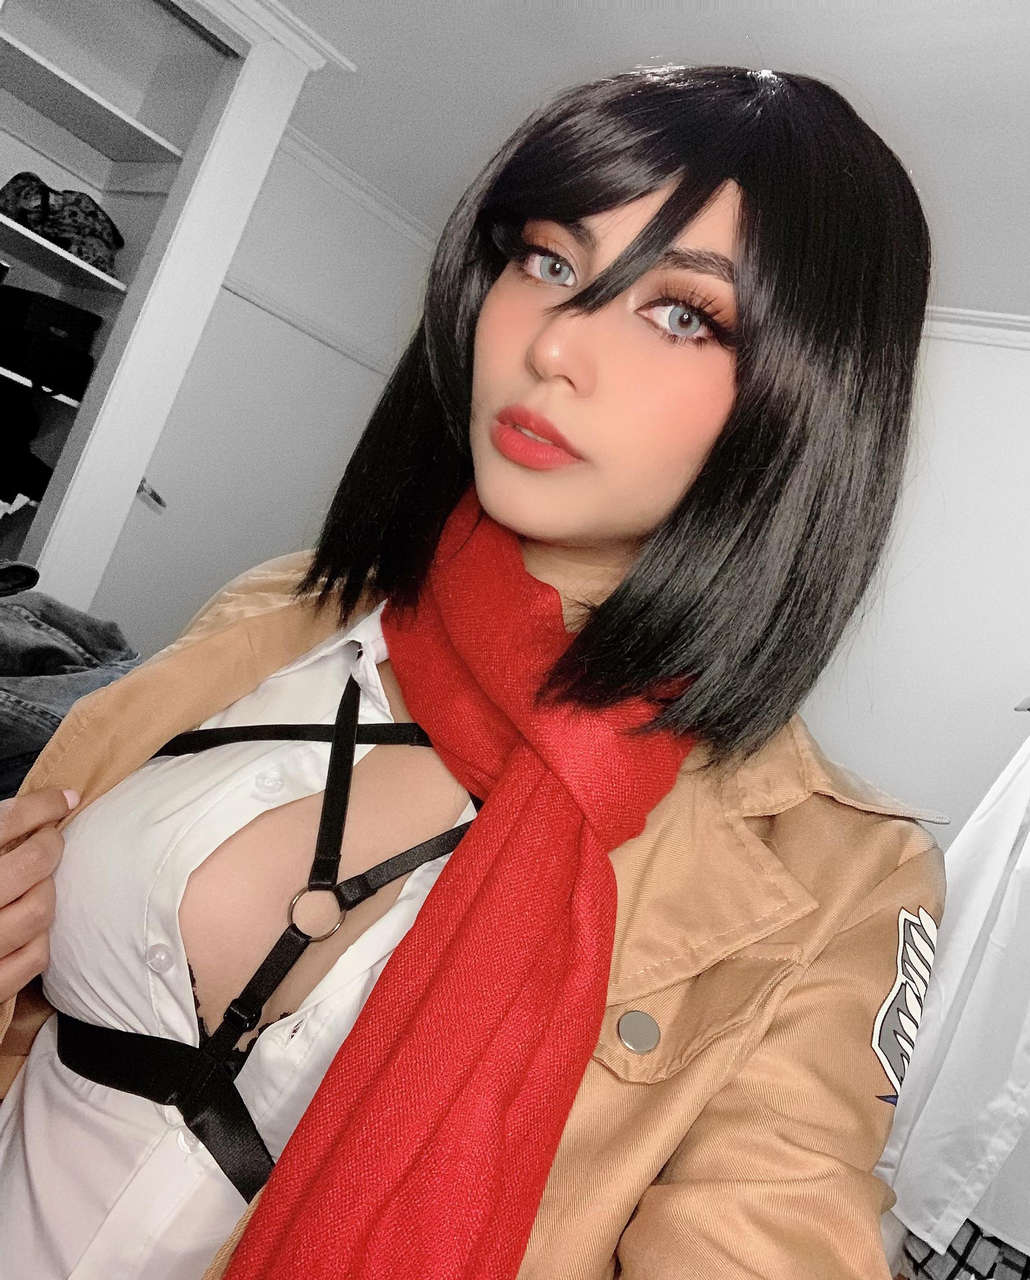 Mikasa Ackerman Cosplay By Miraajane Self I Love Aot So Much And I M So Happy To Cosplay As Bae Mikas